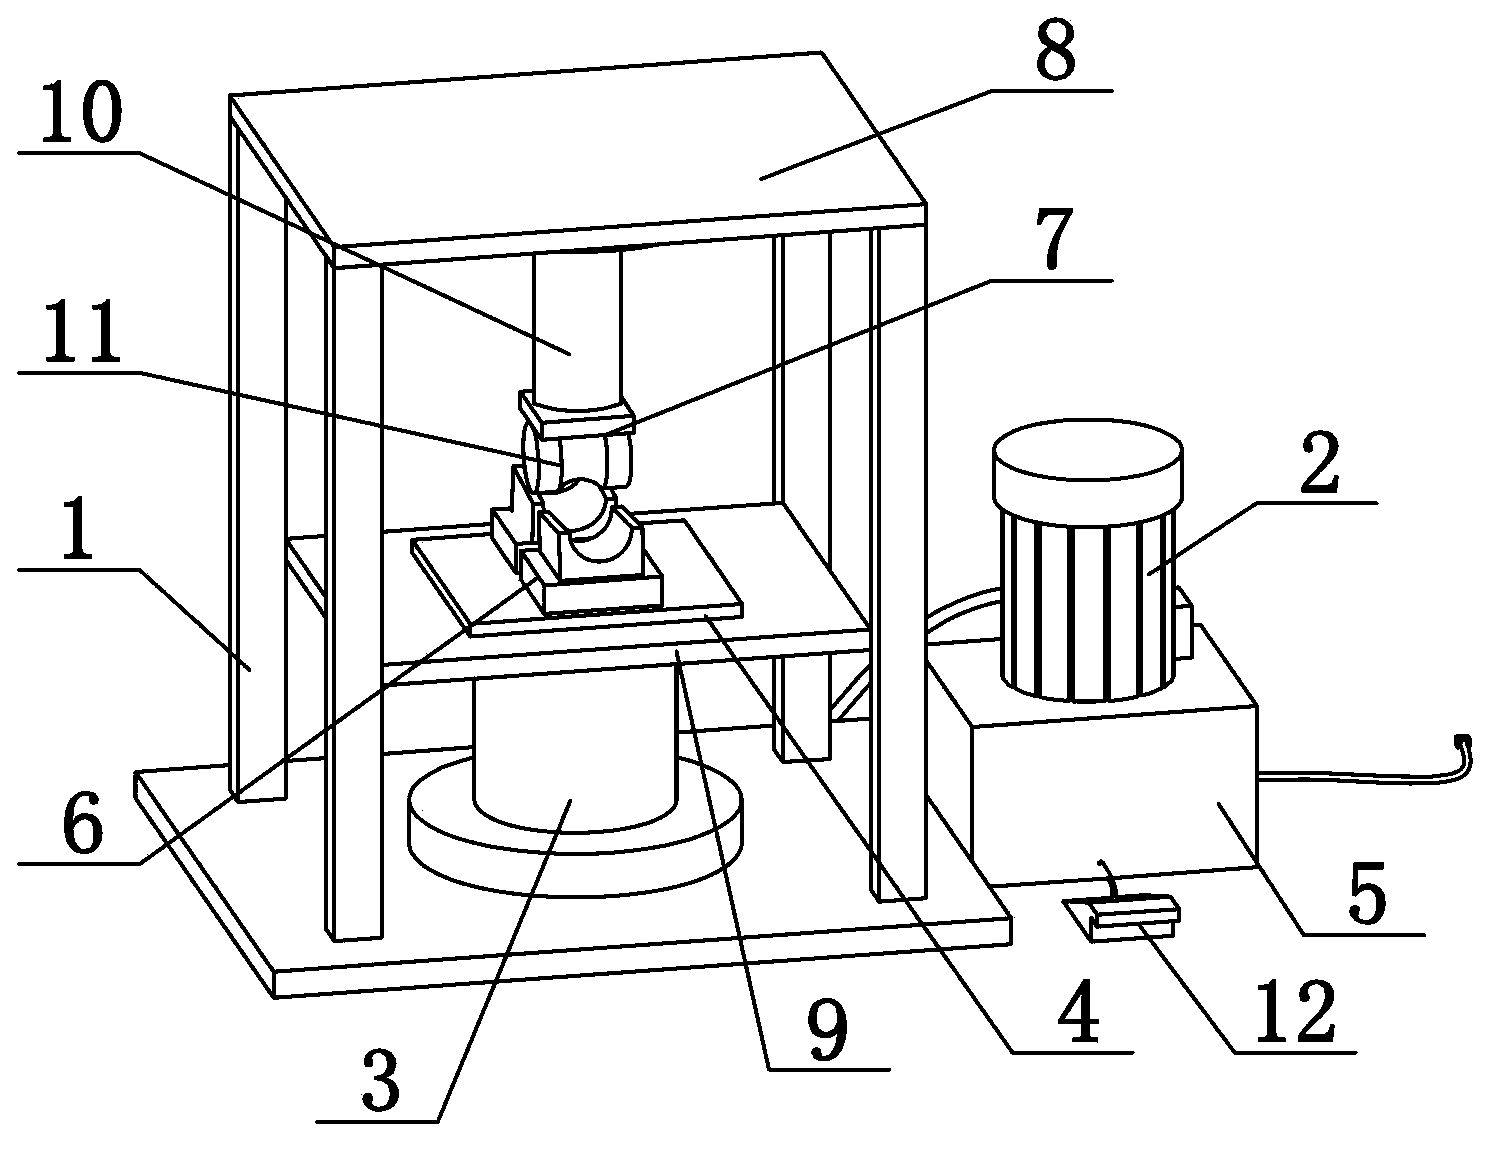 Small-sized bending device